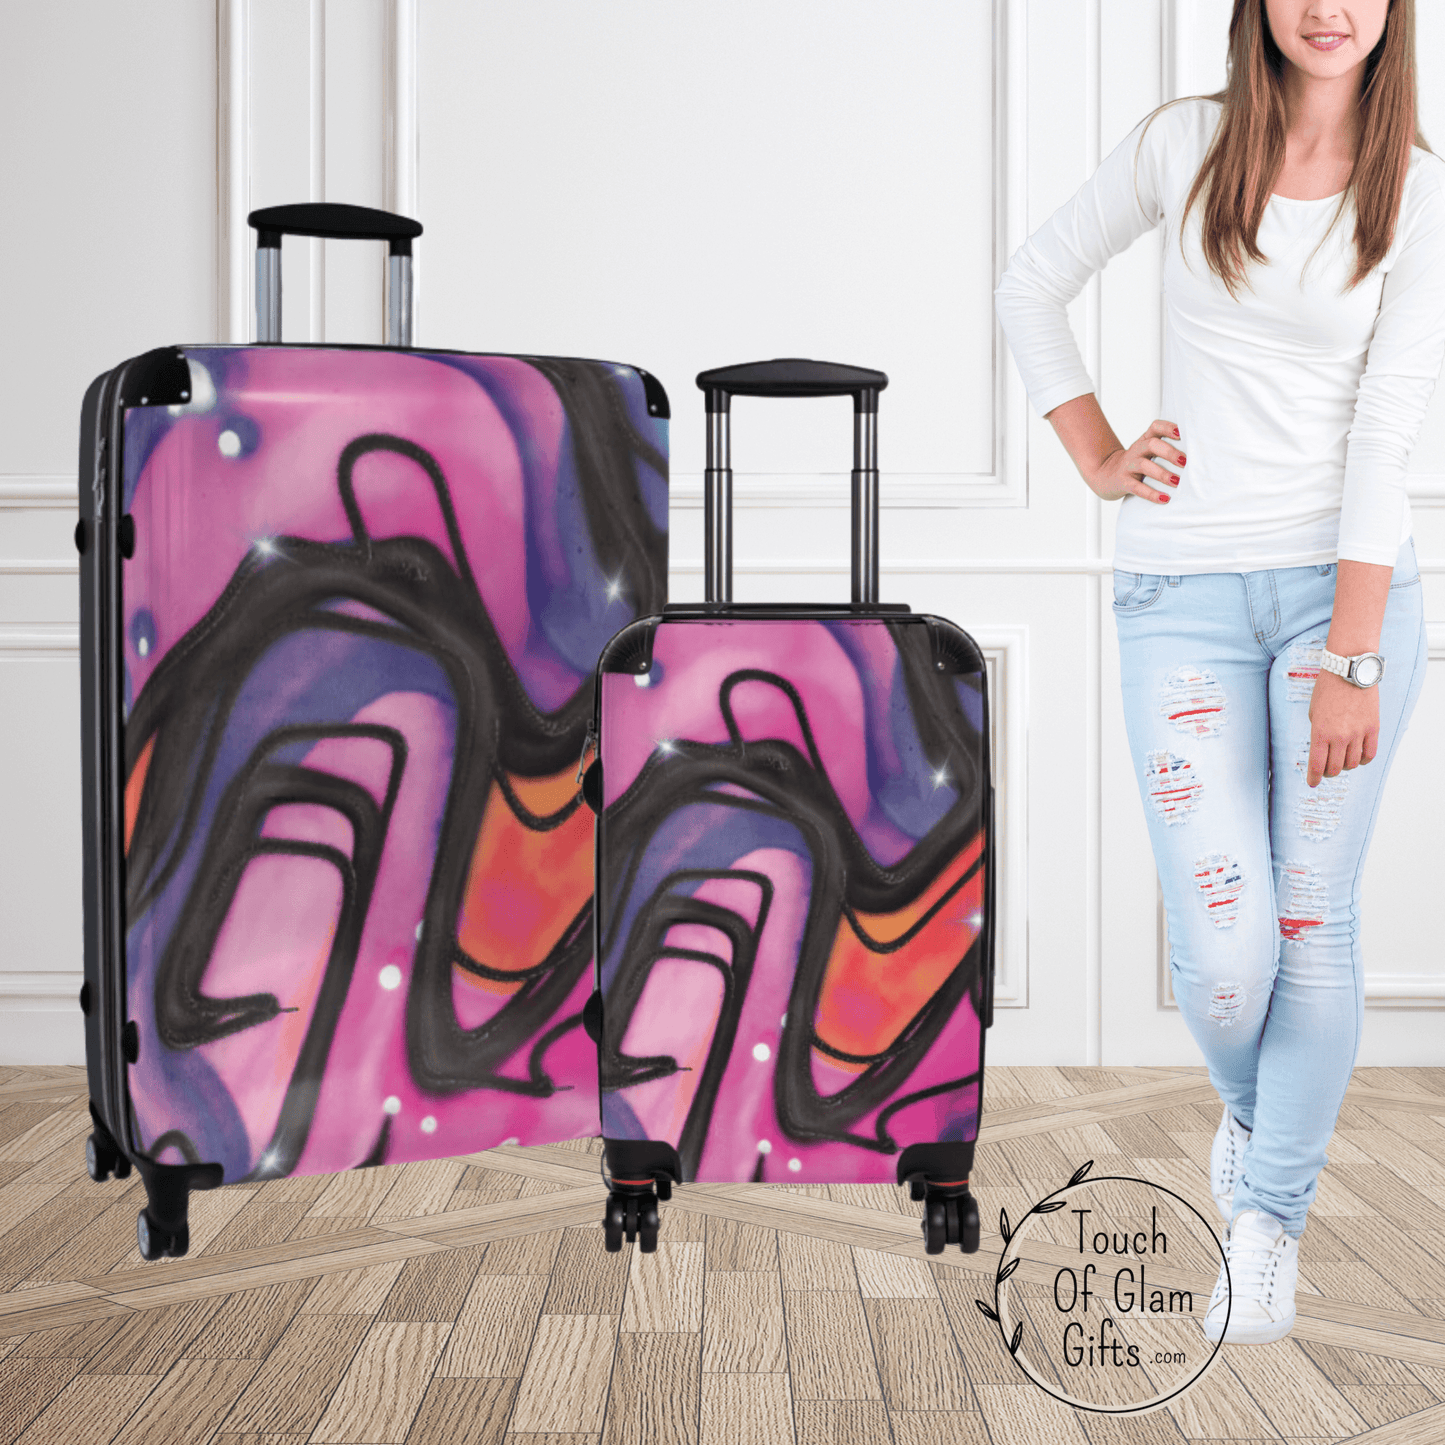 Pink Luggage With Wheels, Pink Luggage For Girls, Pink Suitcase, Suitcase For Teen, Gift For Teen Girl, Retro Suitcase